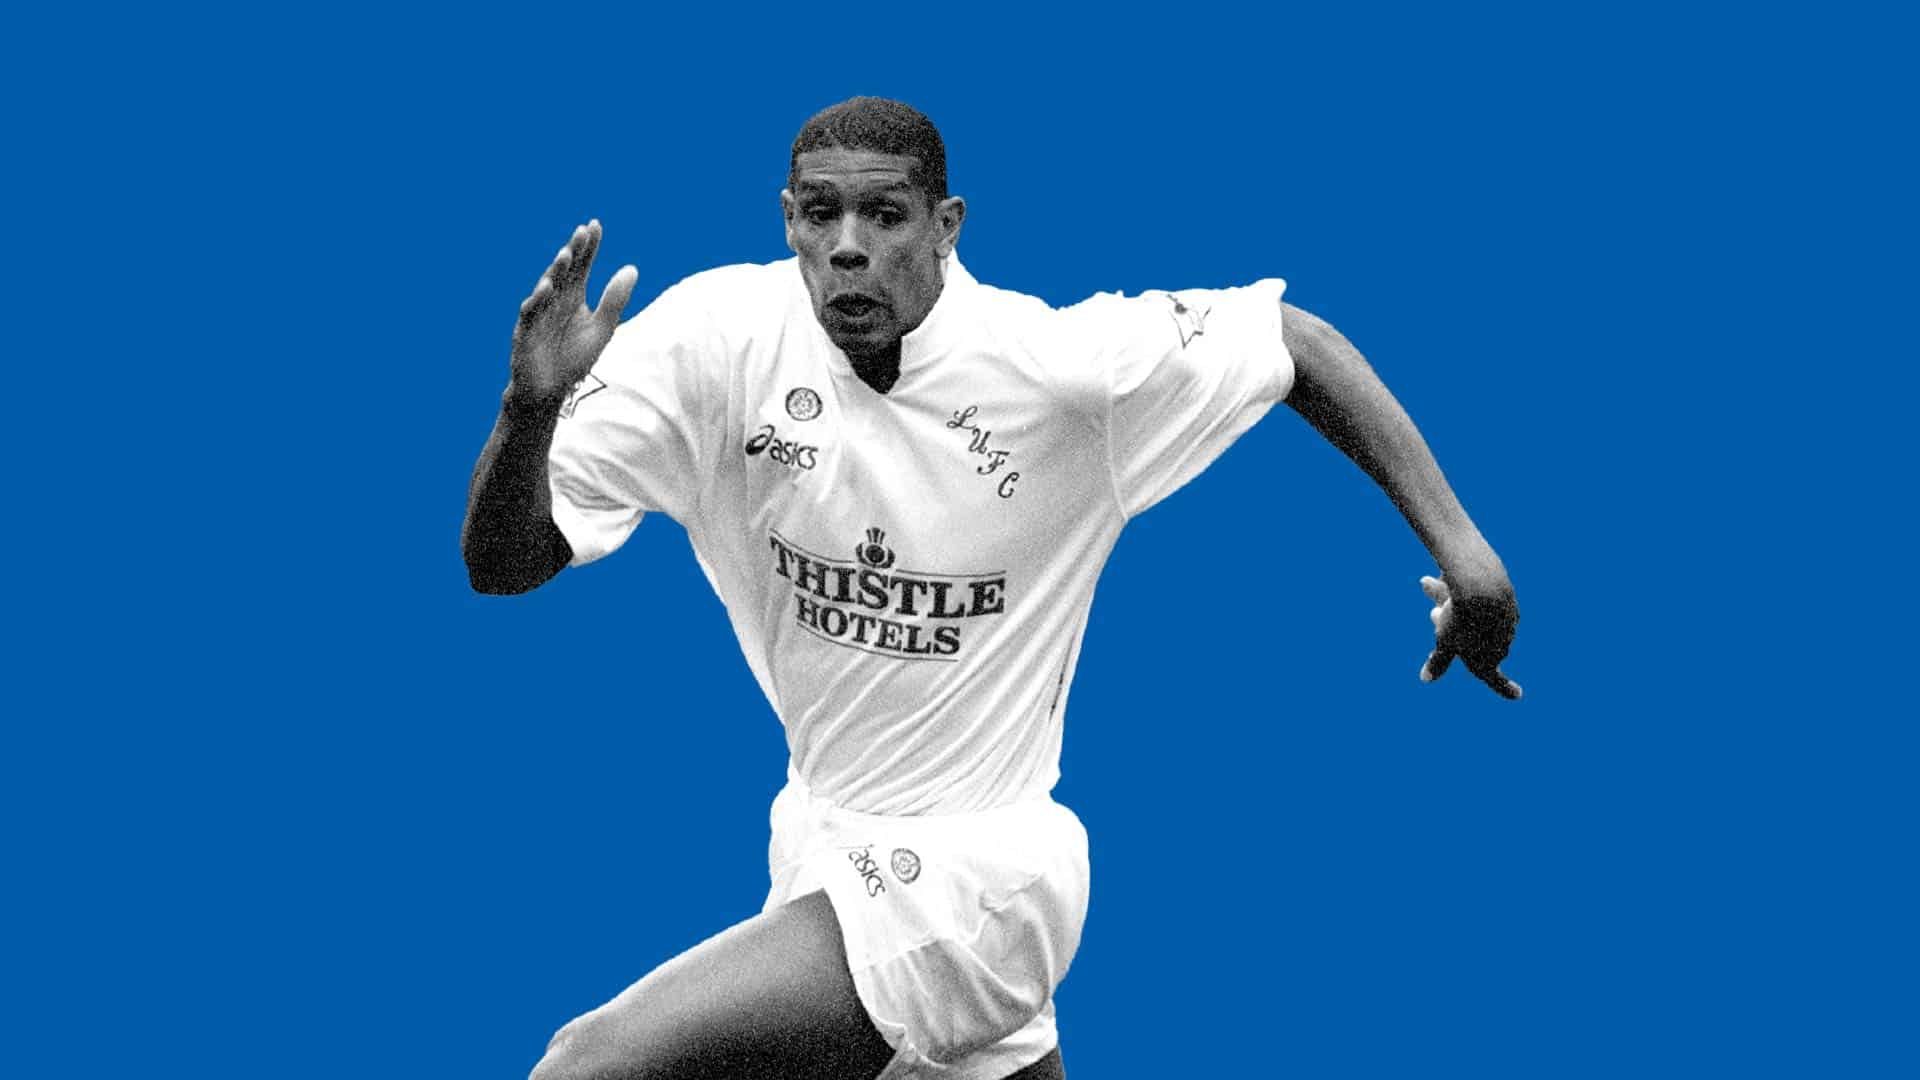 Carlton Palmer in the all white 1996 Thistle Hotels kit